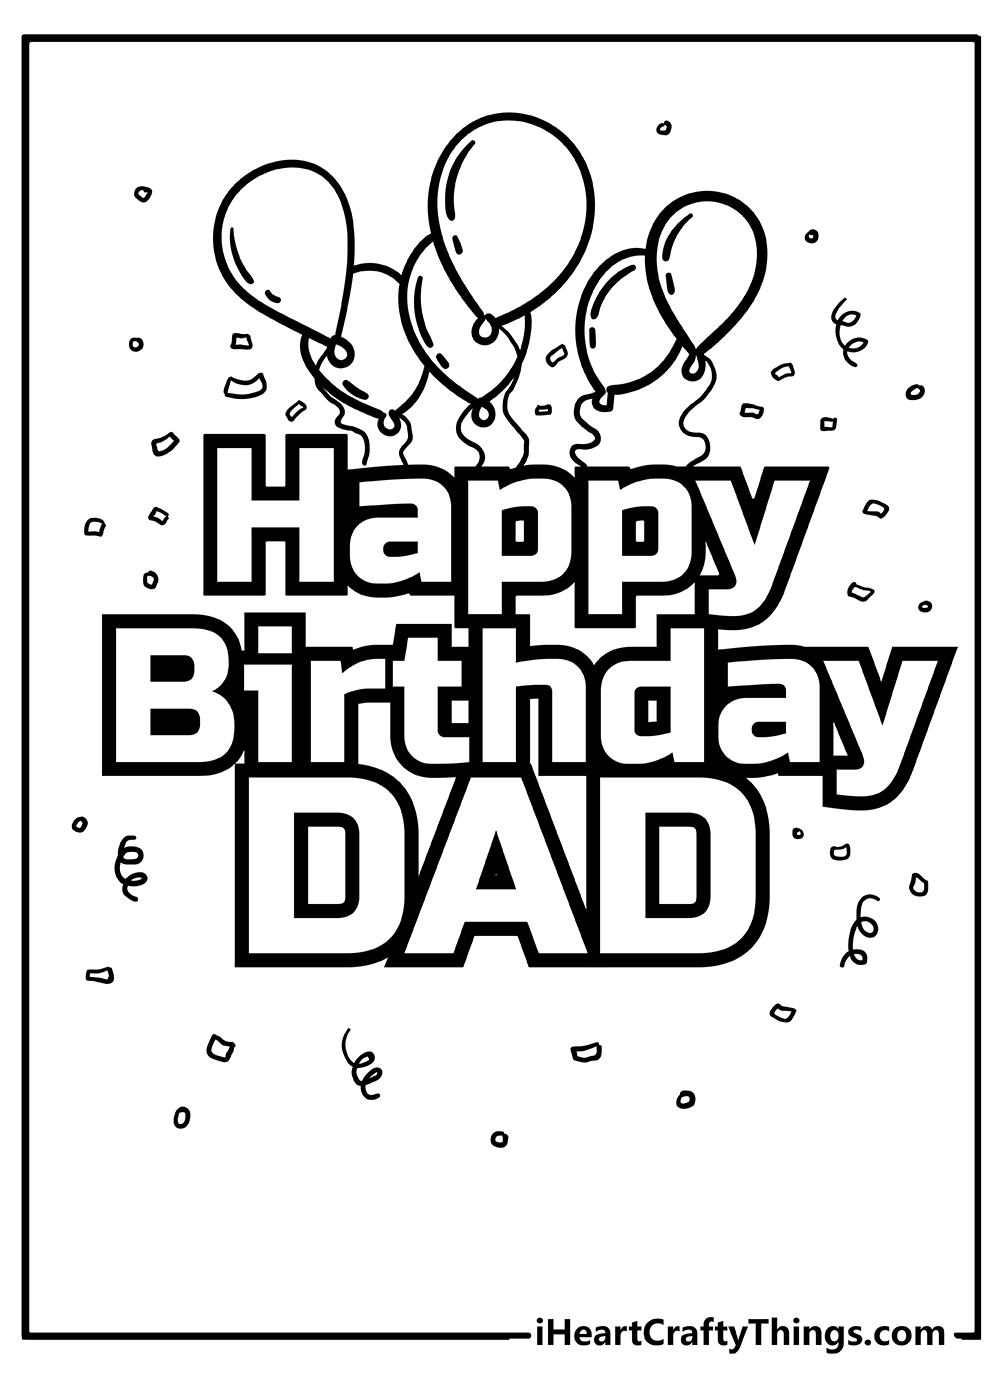 Happy Birthday Dad Coloring Pages for adults free printable